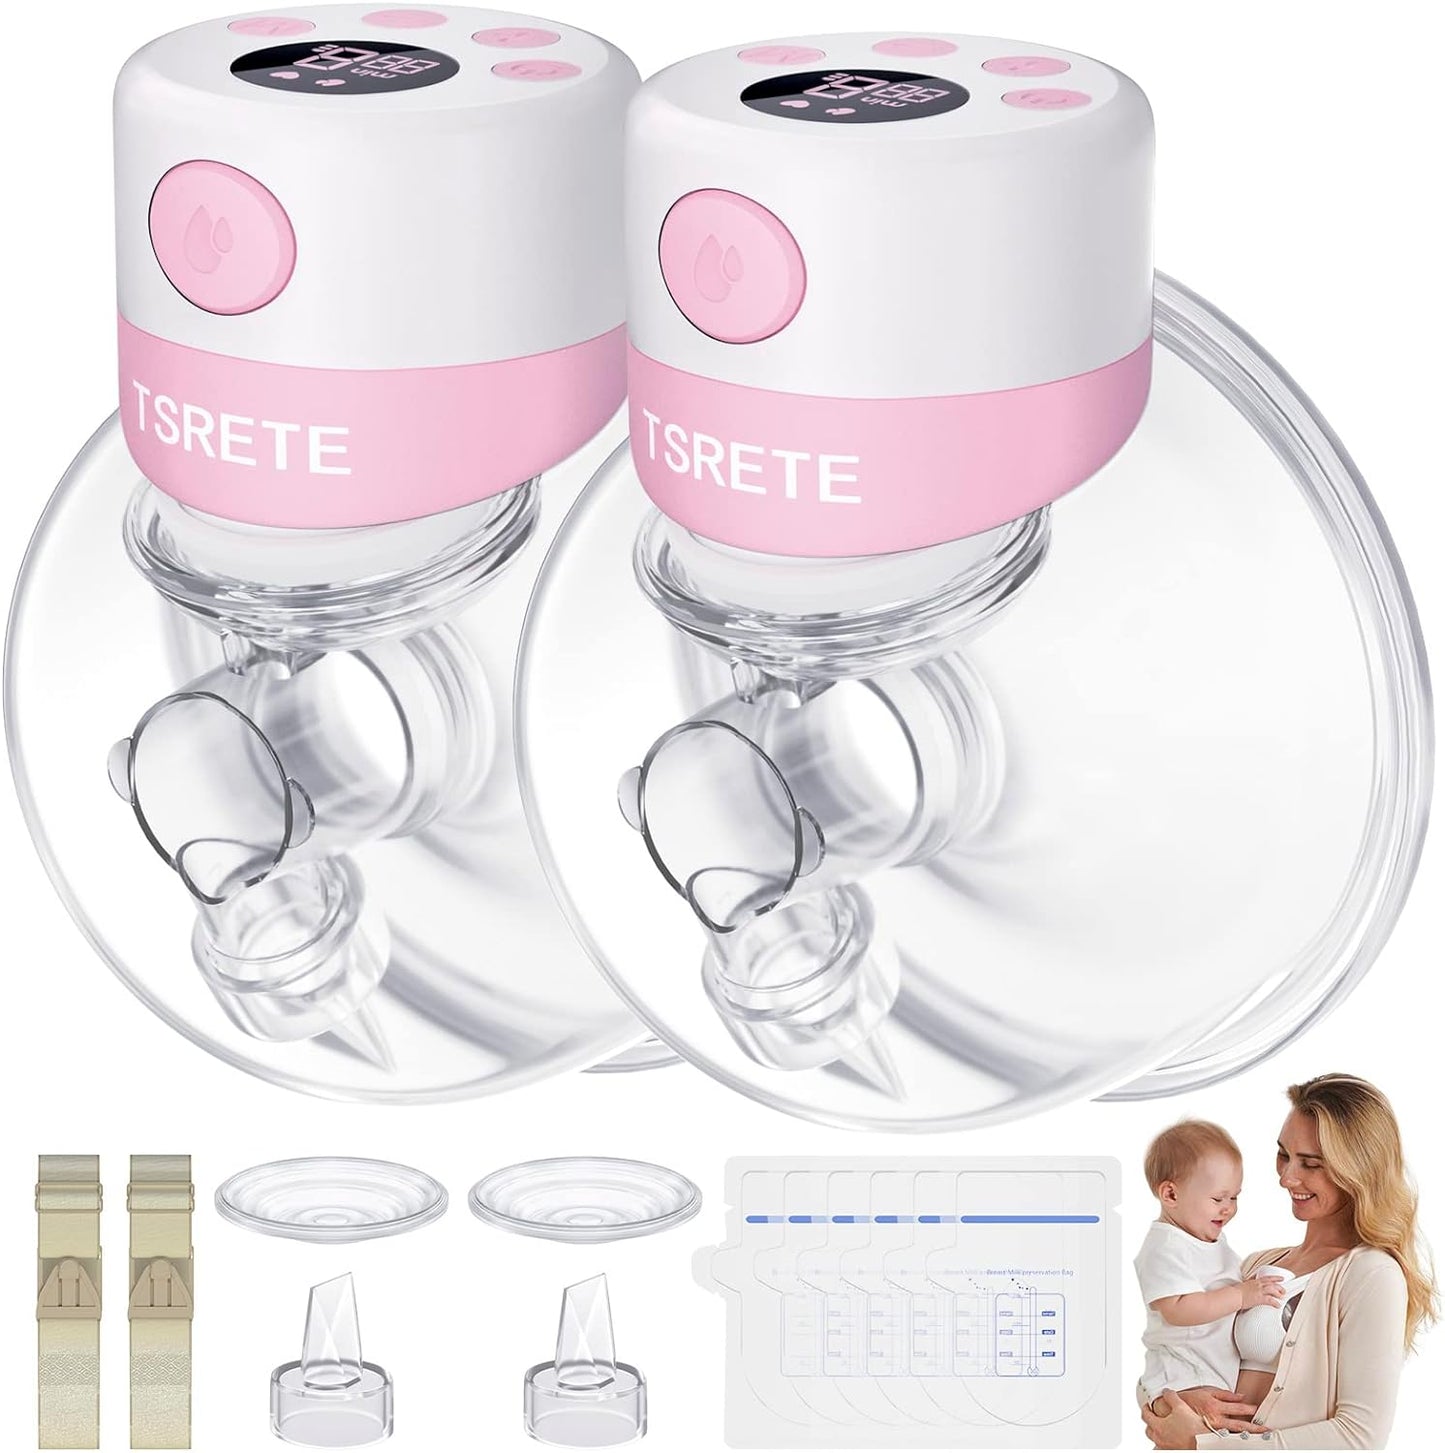 TSRETE Double Wearable Breast Pump, Electric Hands-Free Breast Pumps with 2 Modes